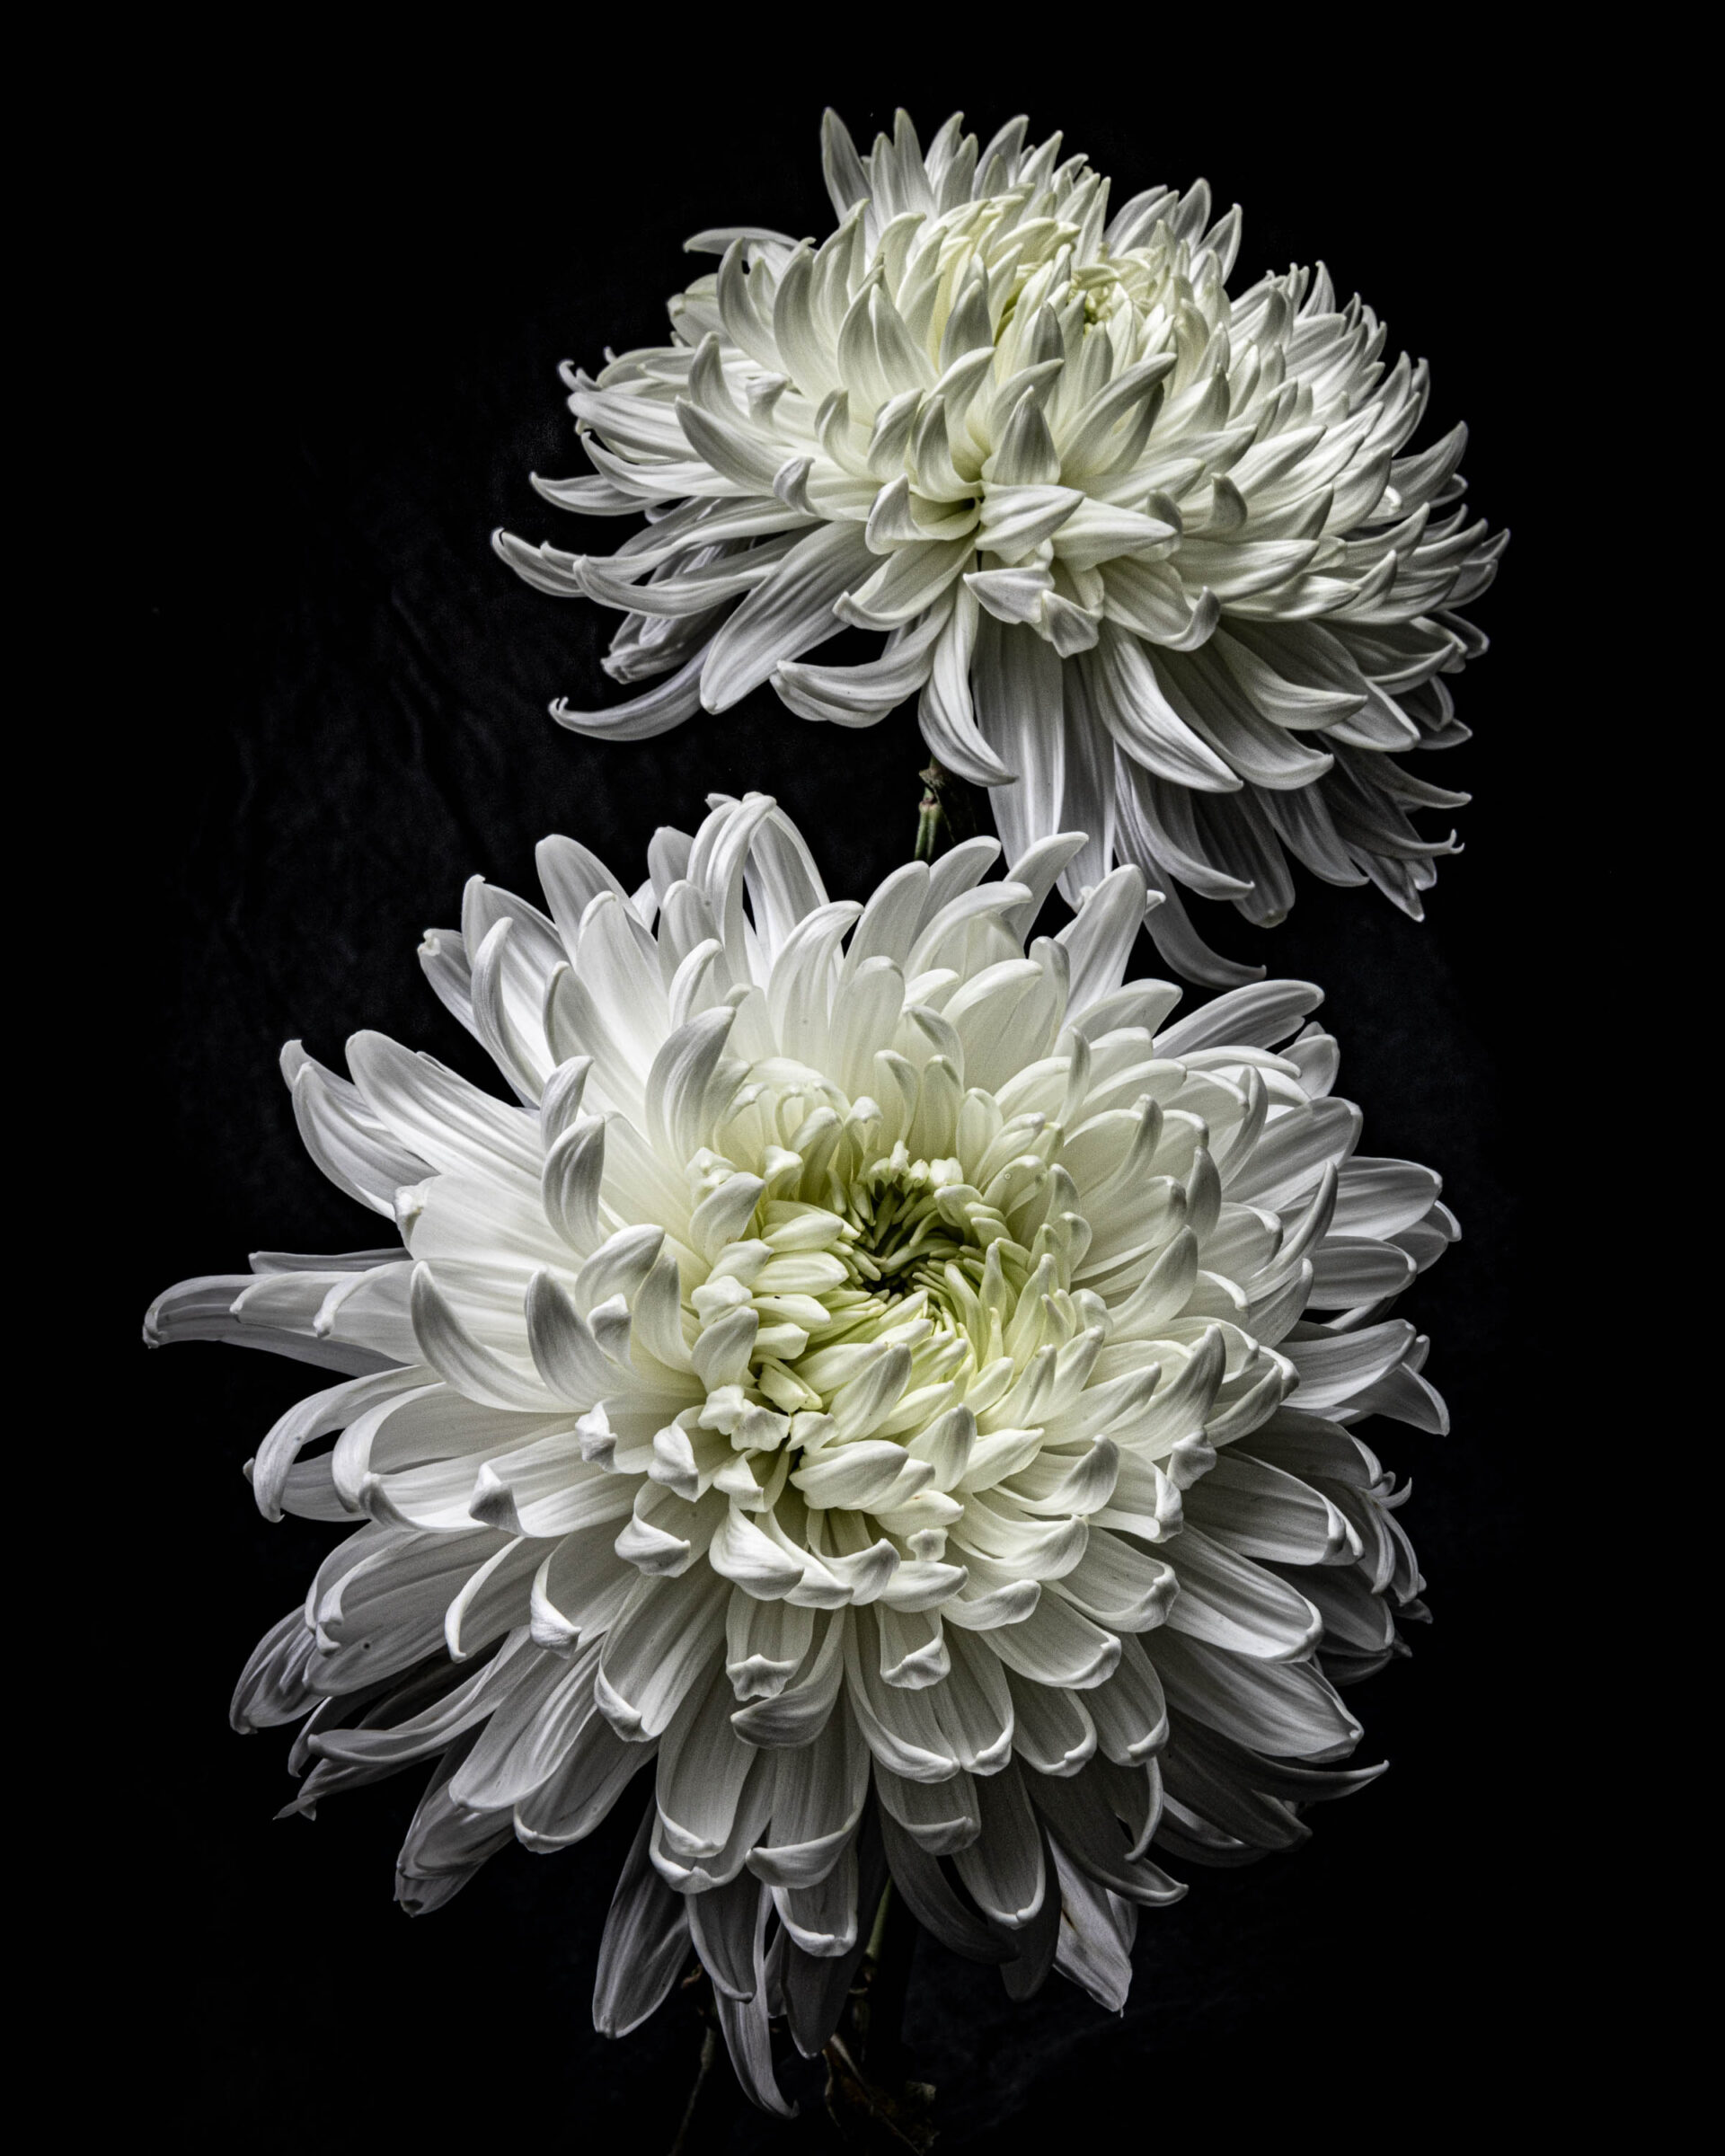 Photograph of two white Chrysanthemums